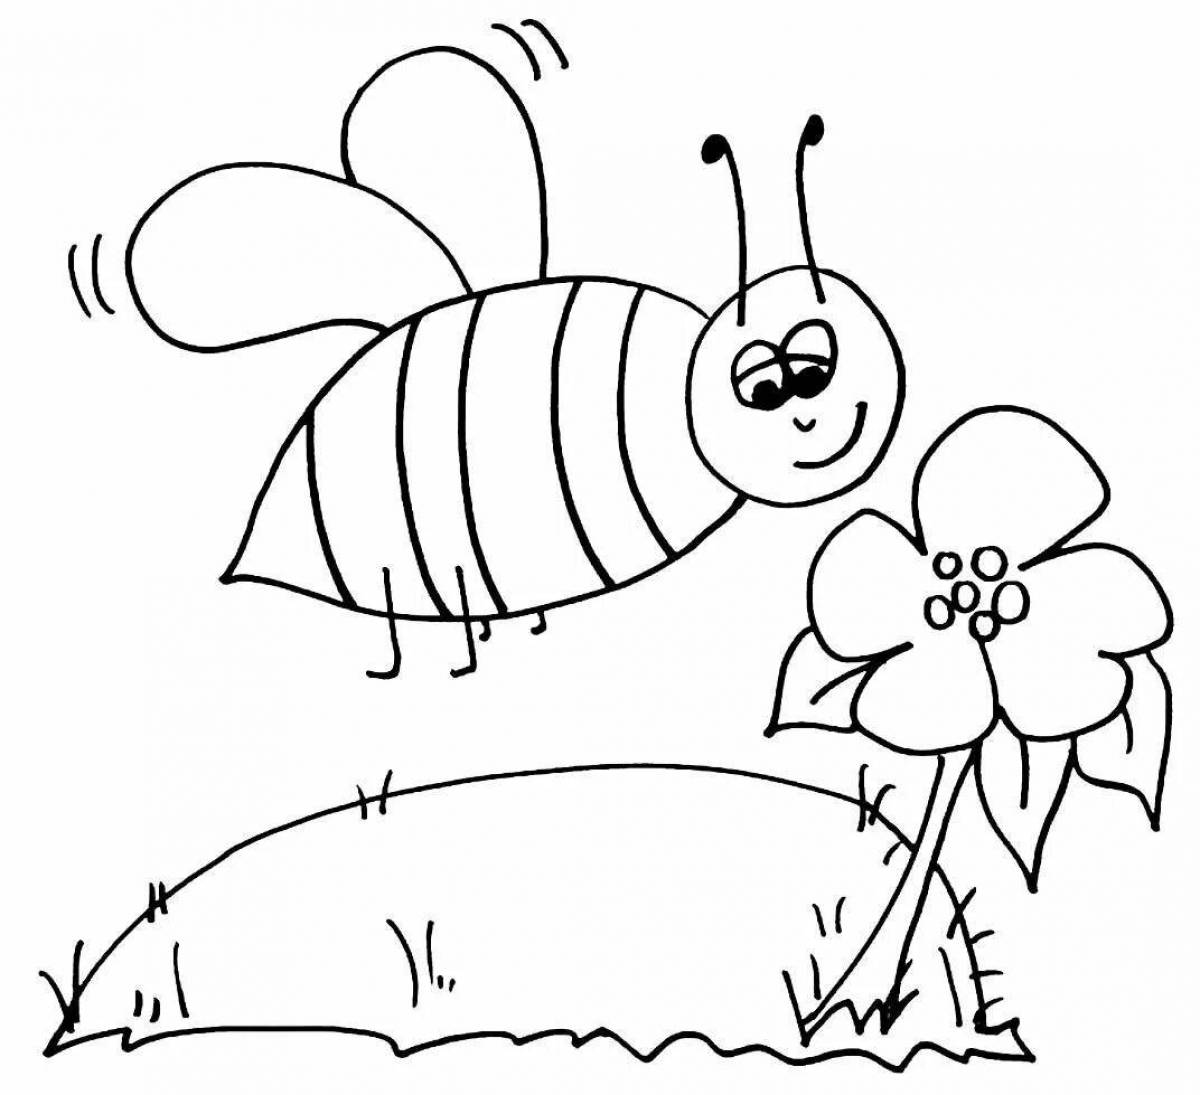 Funny bee coloring book for children 6-7 years old